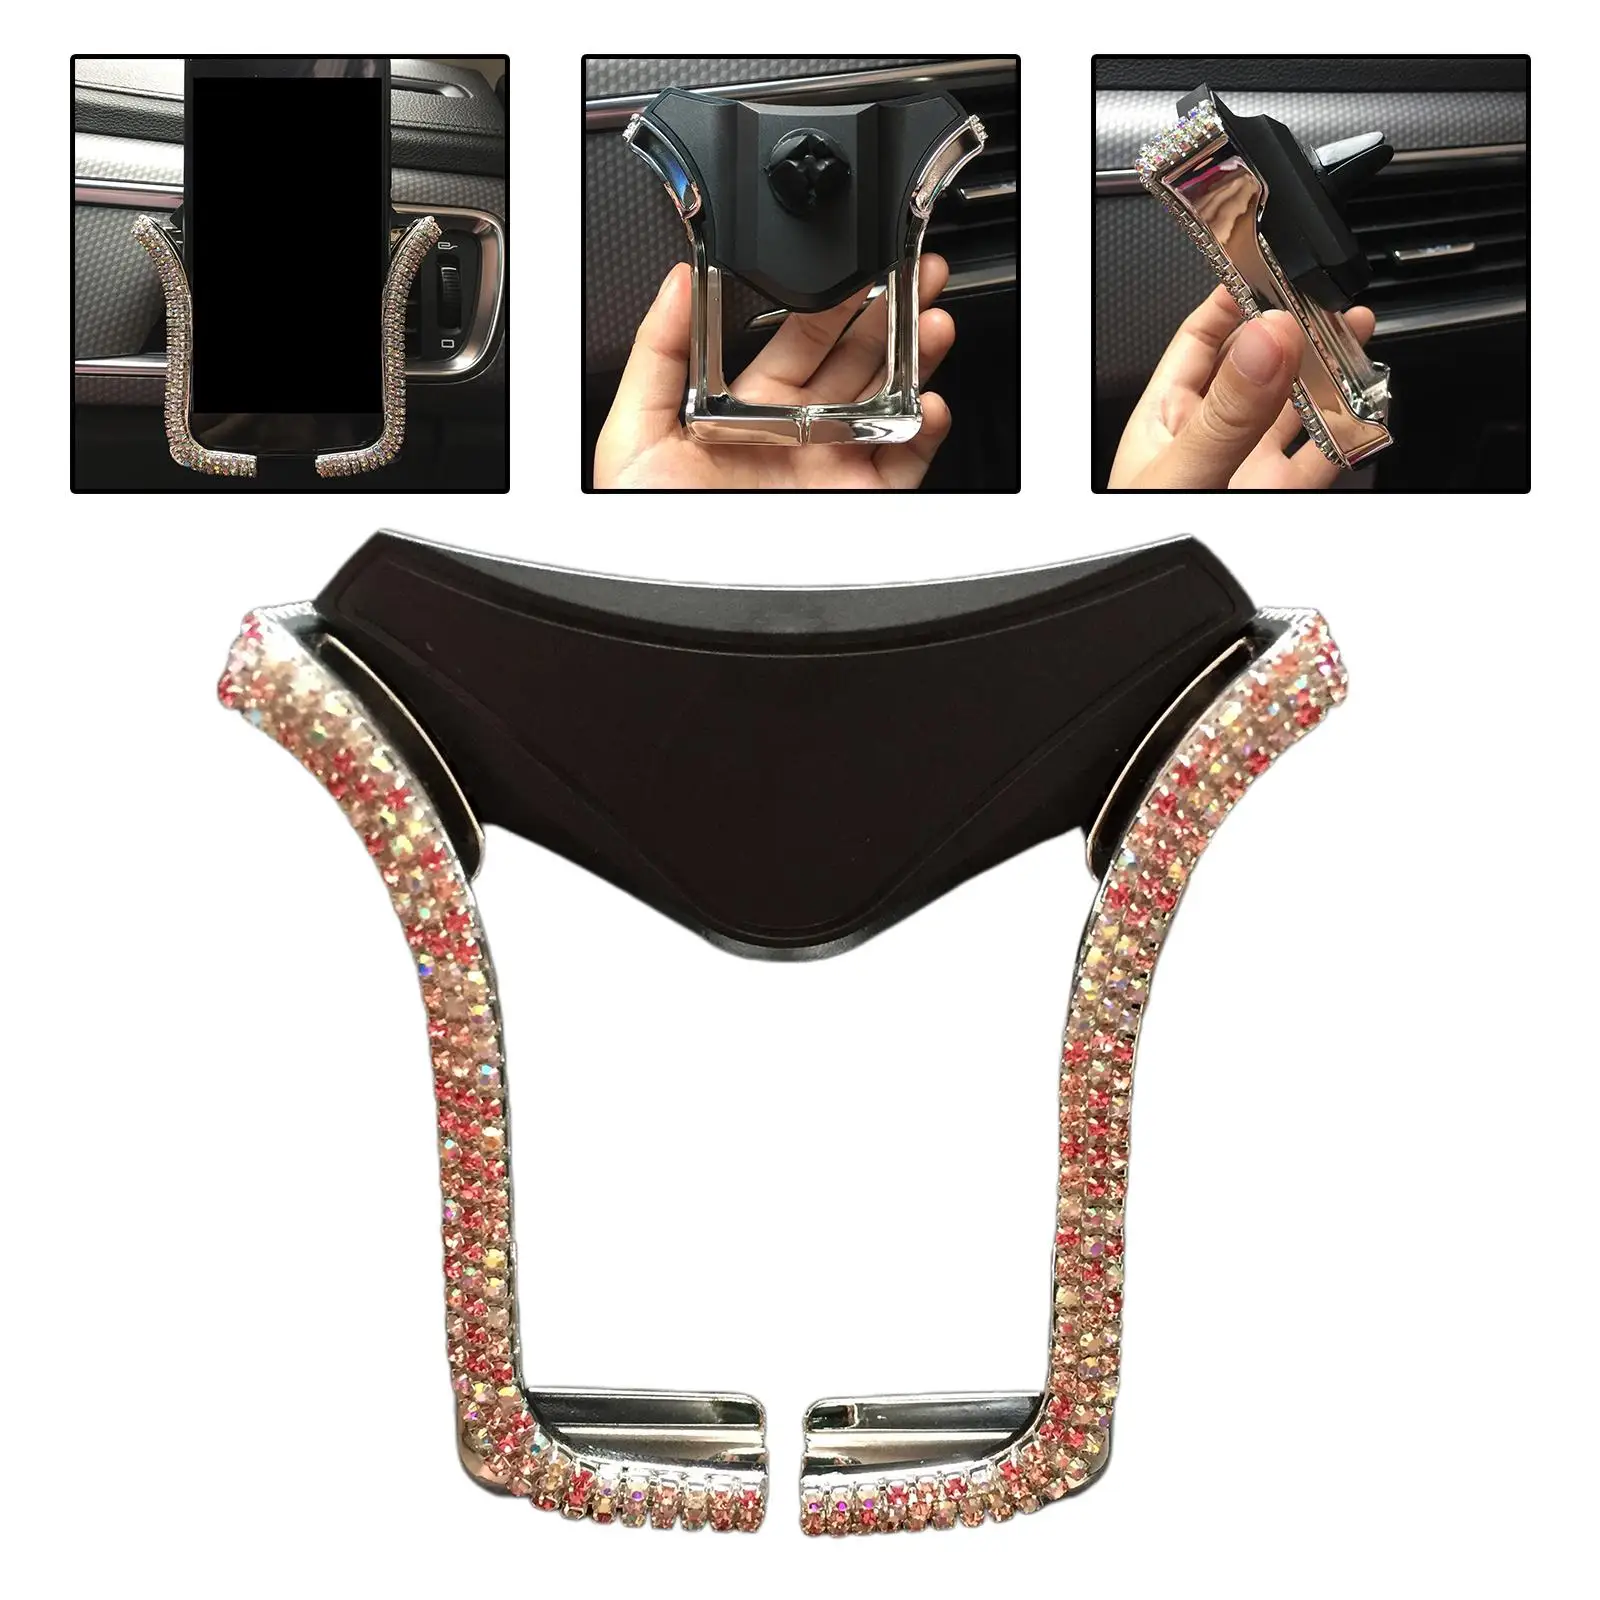 Bling Car Phone Holder Universal Adjustable Automatic Phone Holder for 4.0-6.5 inch Phones